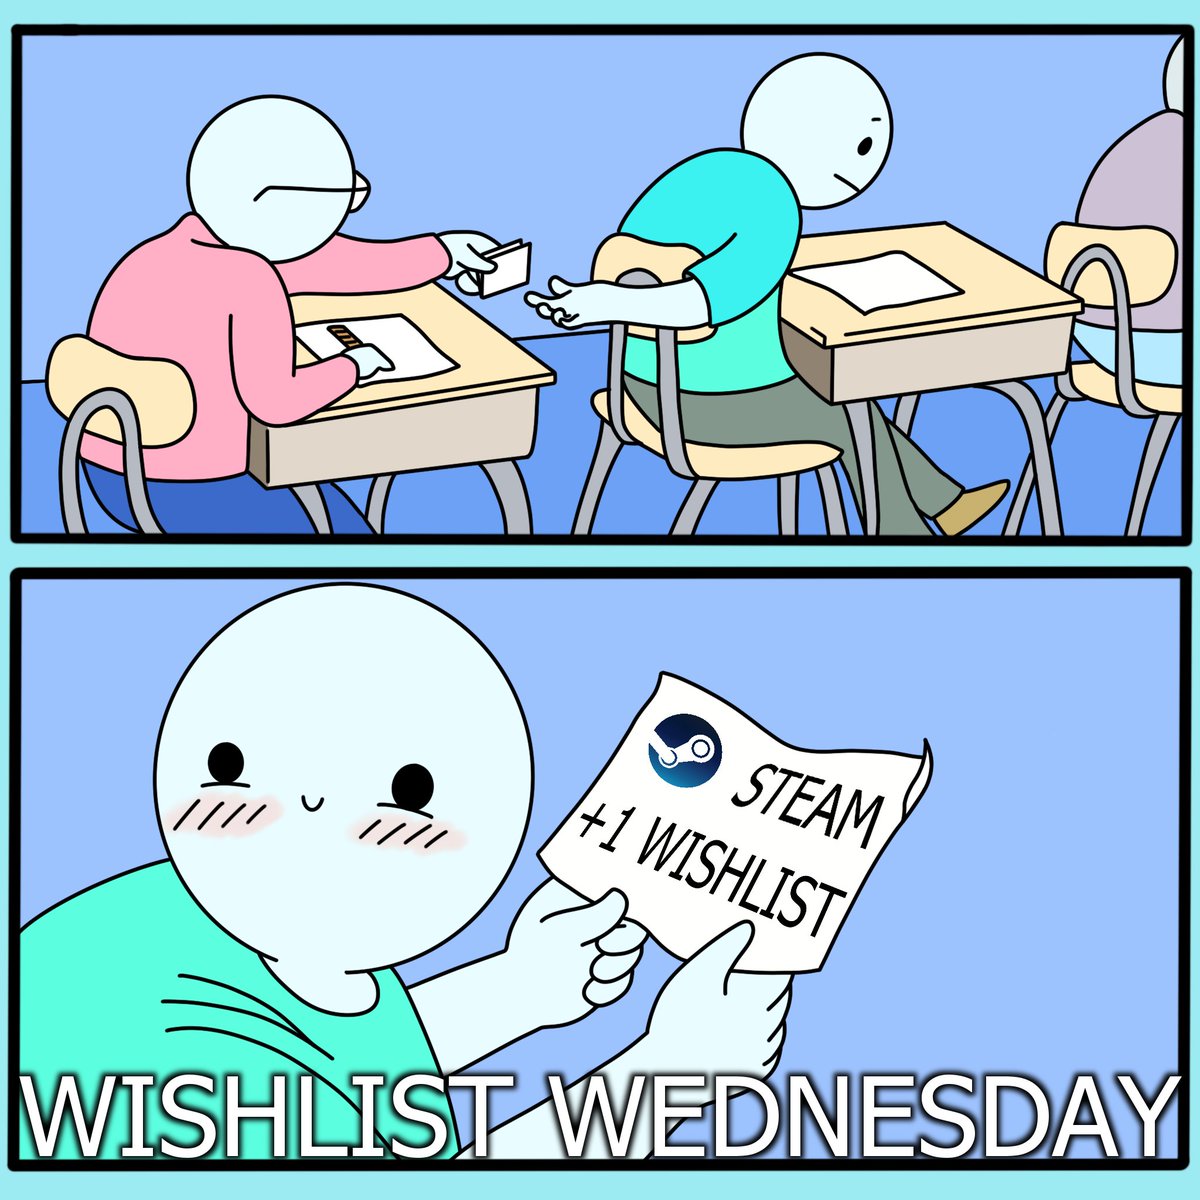 Welcome to another #WishlistWednesday!

Let us see some lovely #IndieGame goodness 🥳

#GameDev #IndieDev #Gaming #Unity3D #UnrealEngine